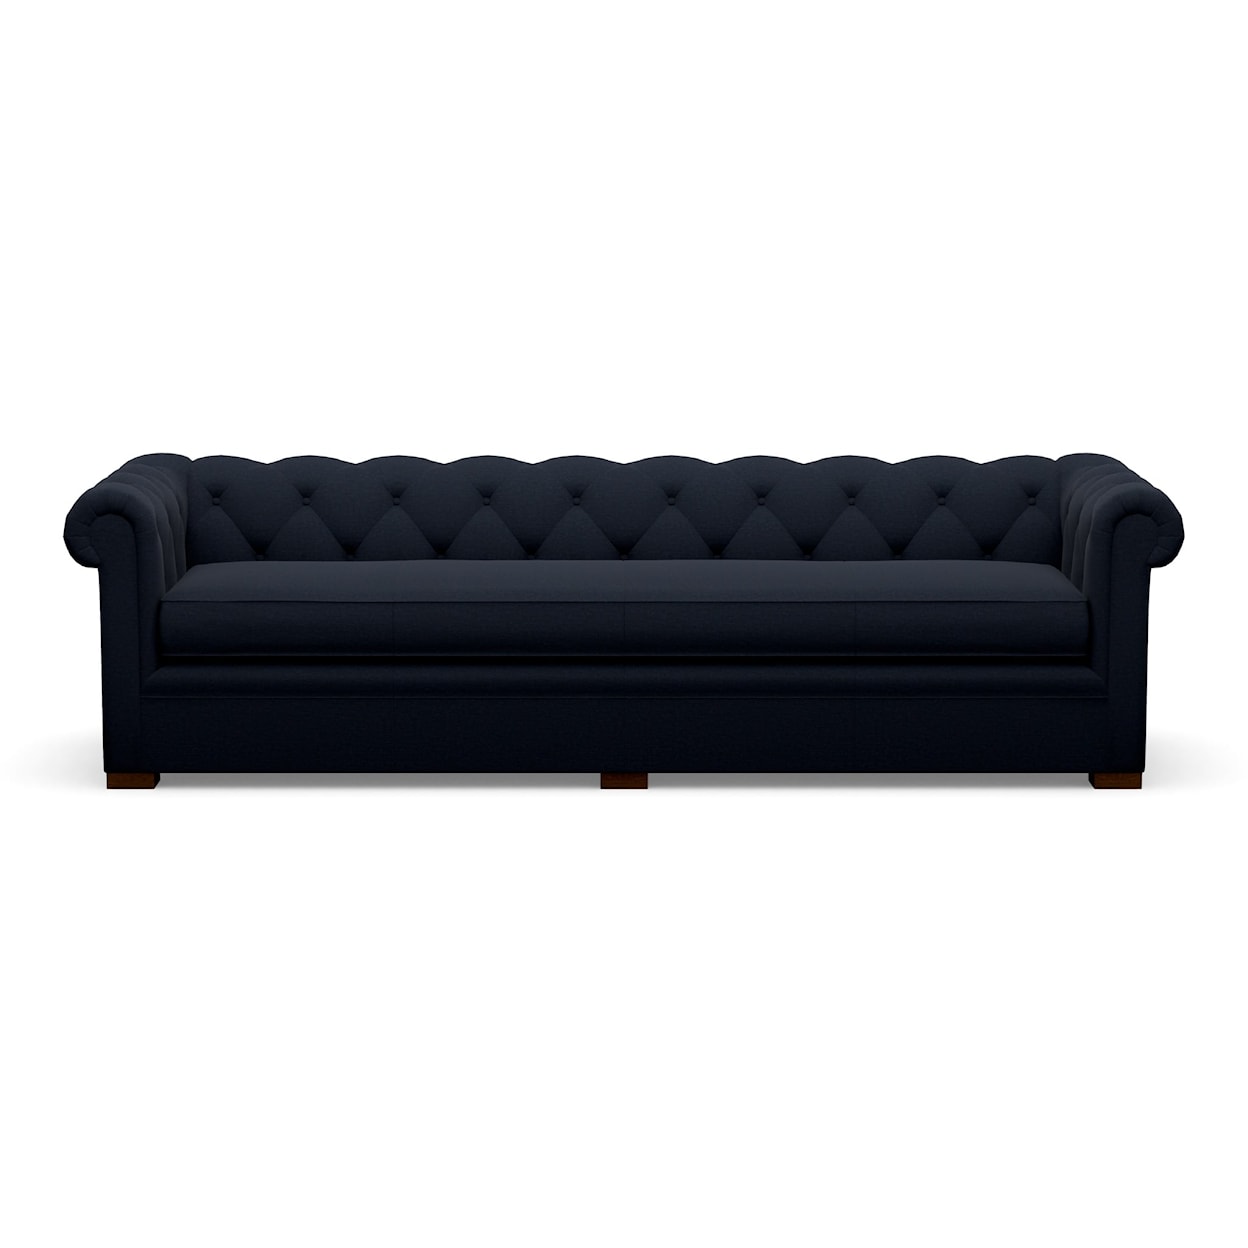 Century Chesterfield Classic Chesterfield Large Sofa (Bench)